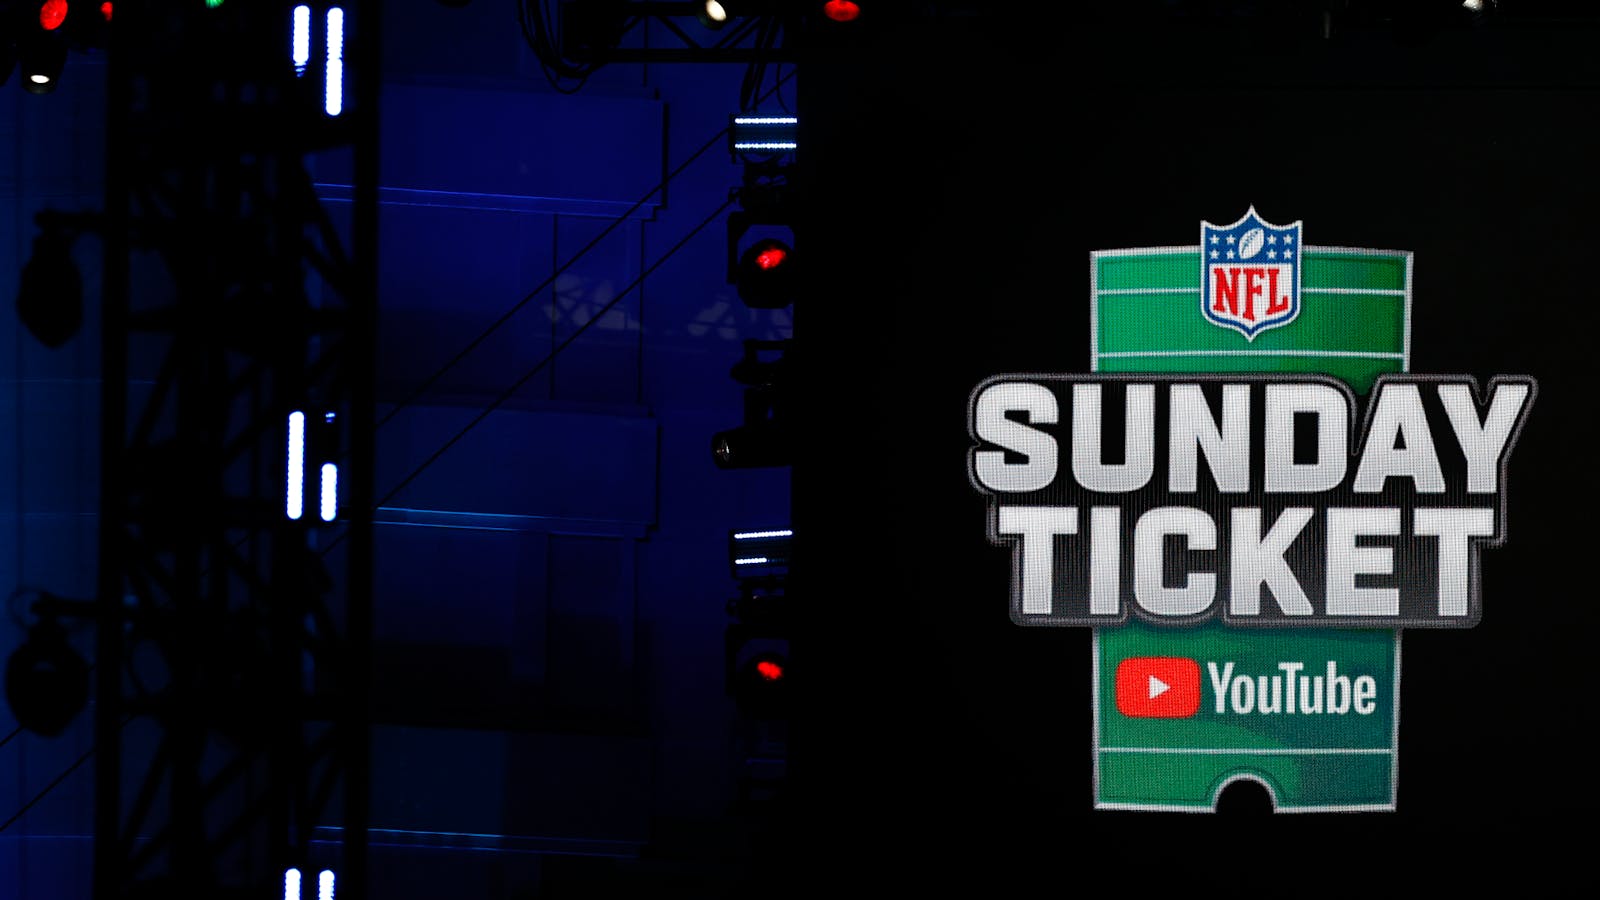 Google:   TV reaches deal to stream NFL Sunday Ticket